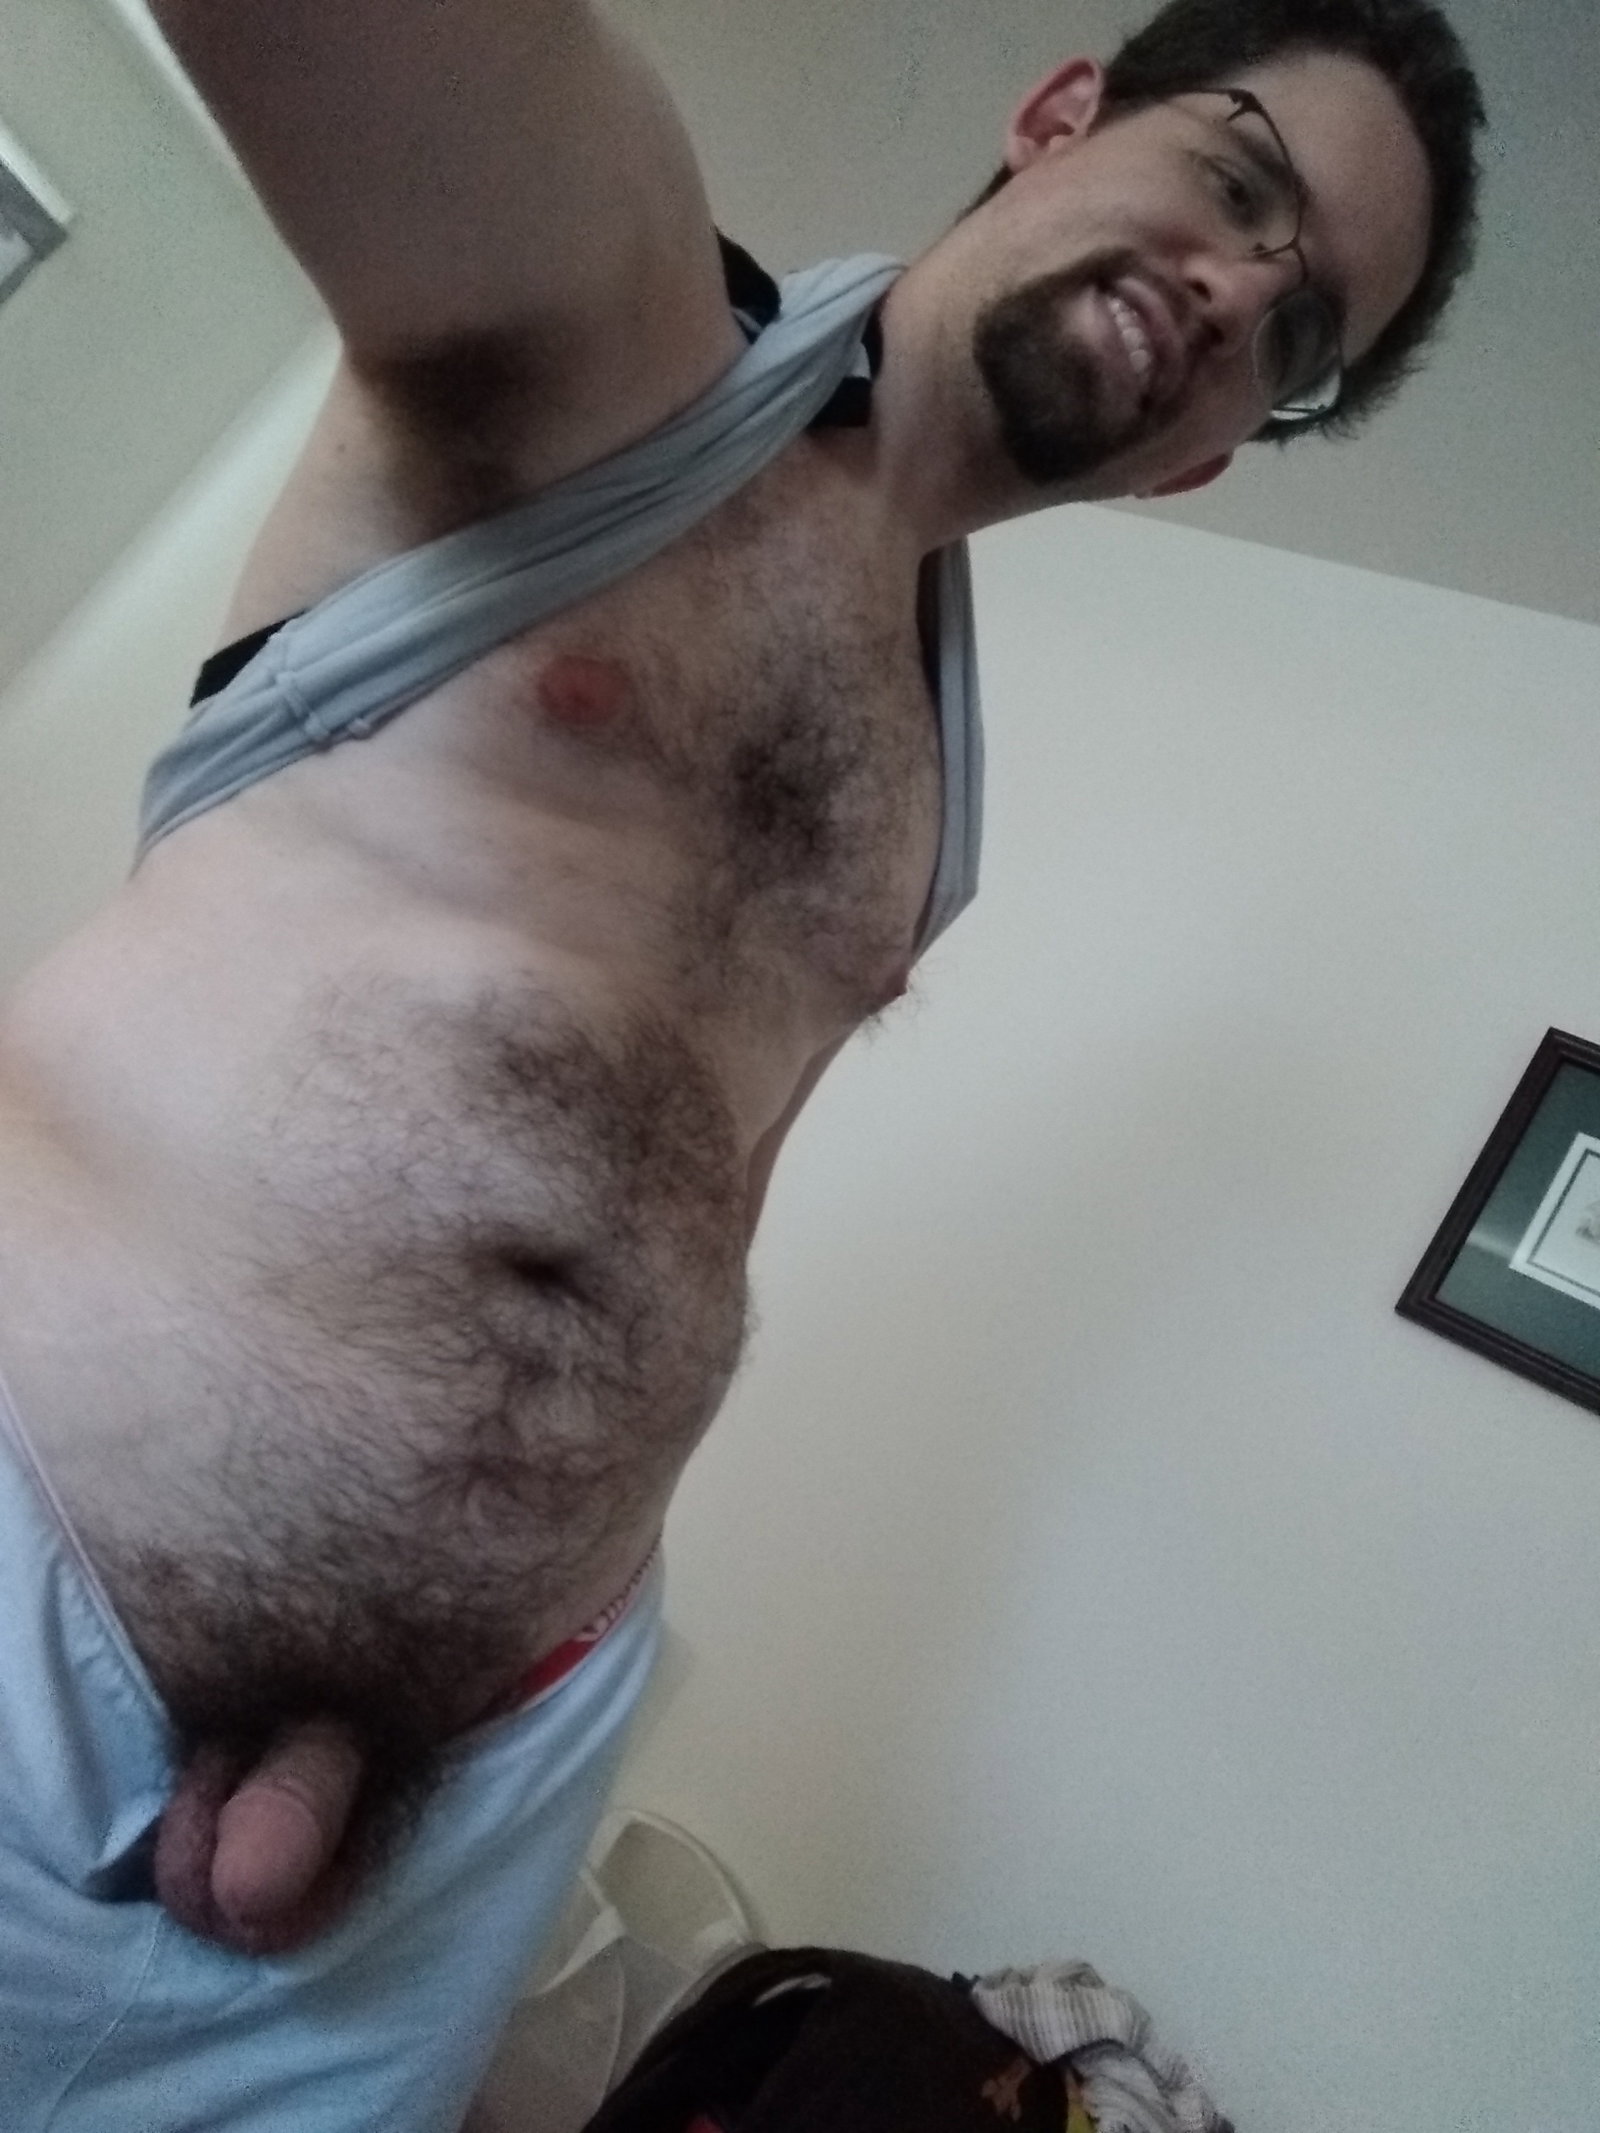 Photo by dcundiesfan with the username @dcundiesfan, who is a verified user,  July 14, 2019 at 11:00 PM and the text says 'I saw on Twitter that today is apparently "National Nude Day". High time that I took another NSFW pic of myself to share!'